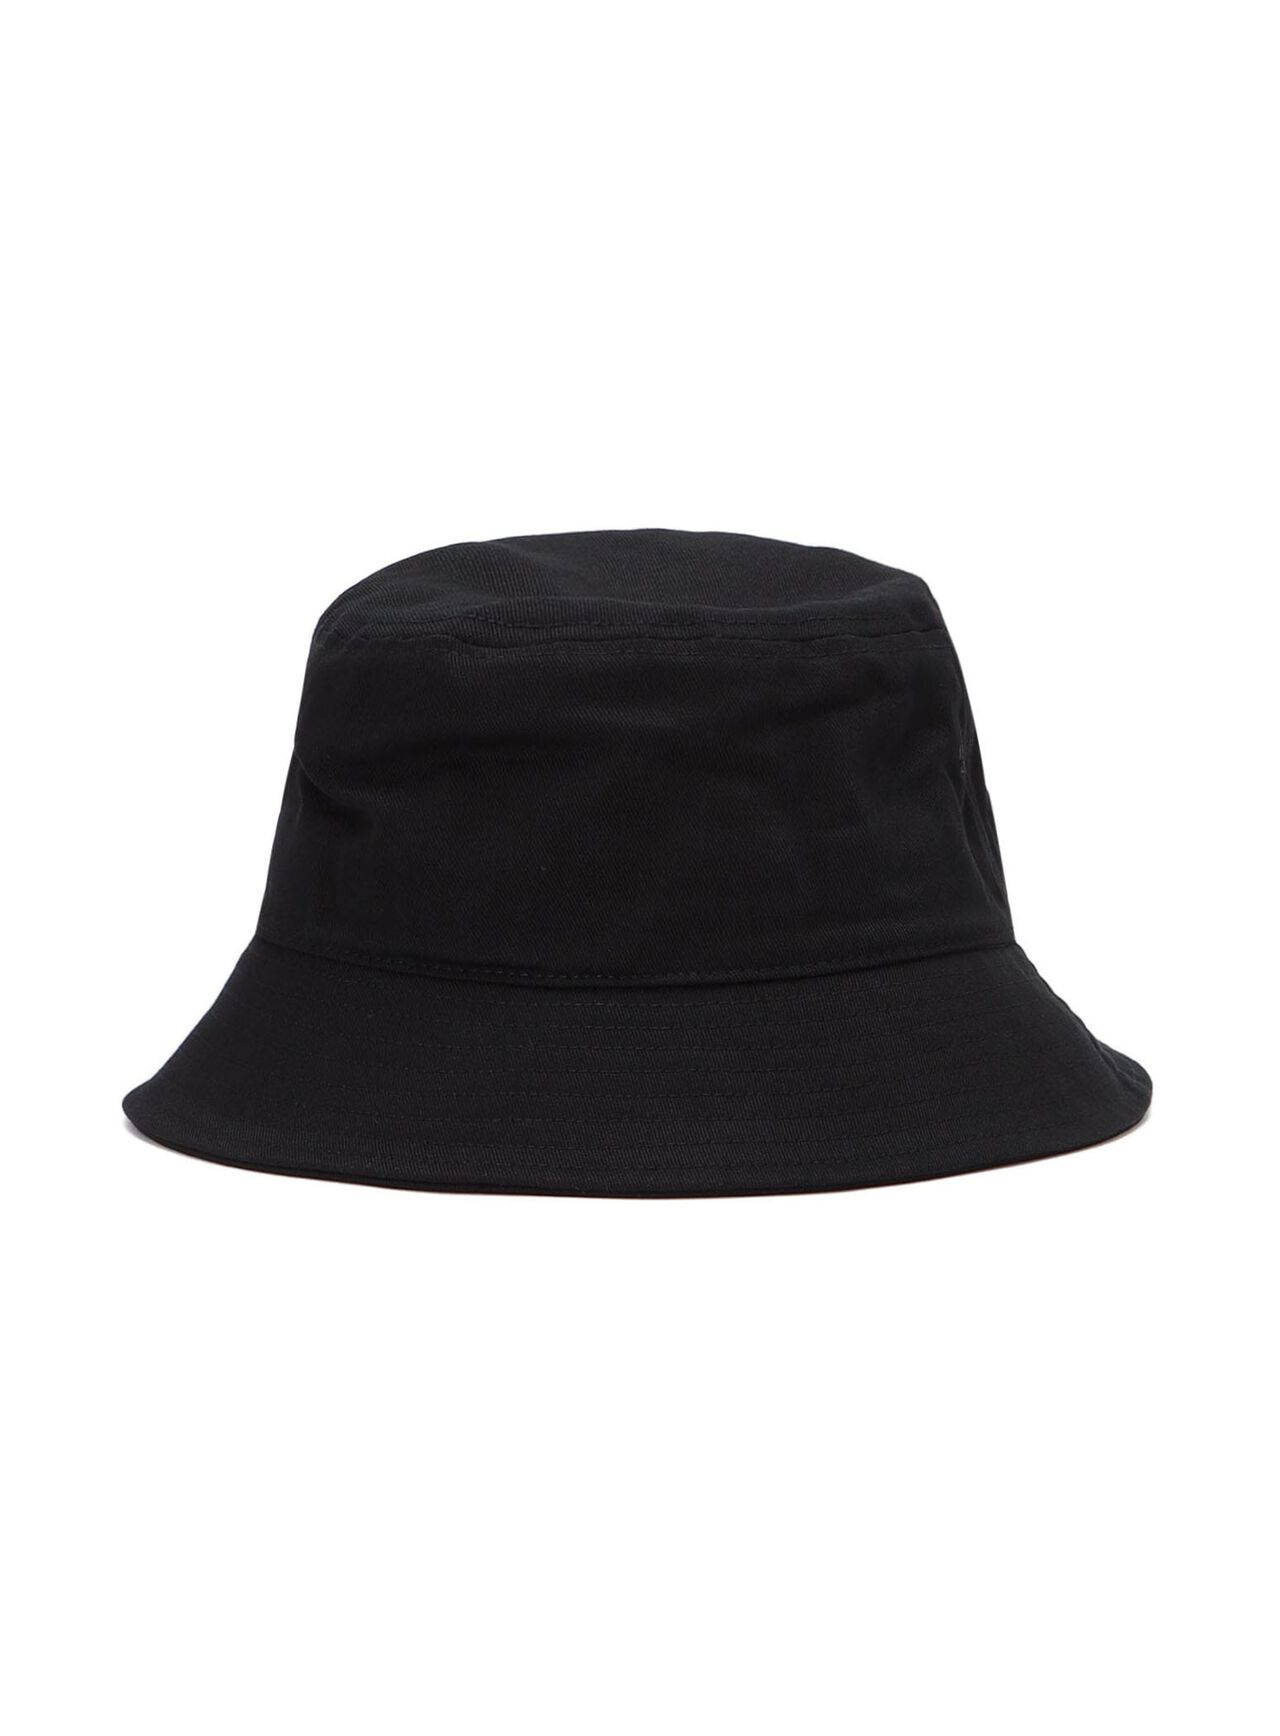 Embroidered Bucket Hat Dashi,ONE, large image number 2